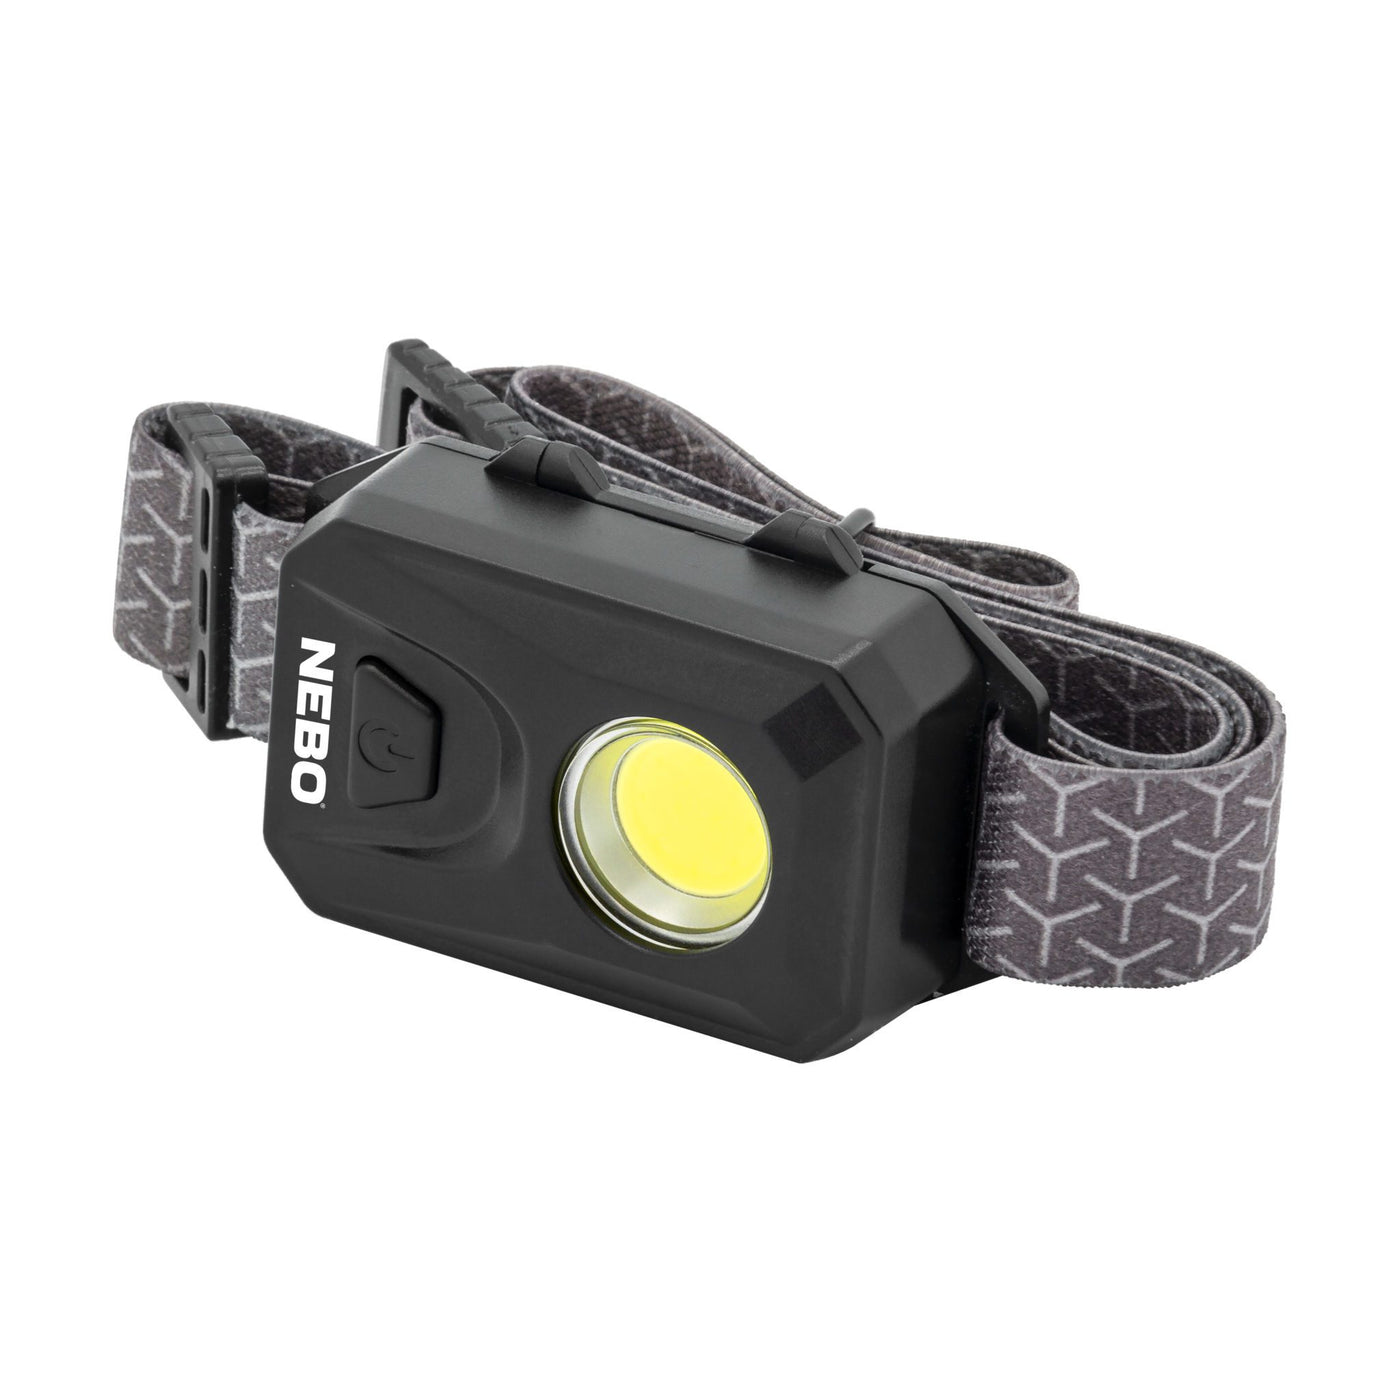 At Nebo Tools, we continually innovate so that we can offer the highest quality LED lighting products at the best price. The 150 Lumen Headlamp by NEBO is a low profile, compact 150 lumen headlamp with 3 light modes; High, Low & Strobe. Equipped with an adjustable and flexible head strap, easily resize the strap to fit. 150 Headlamp is also water resistant